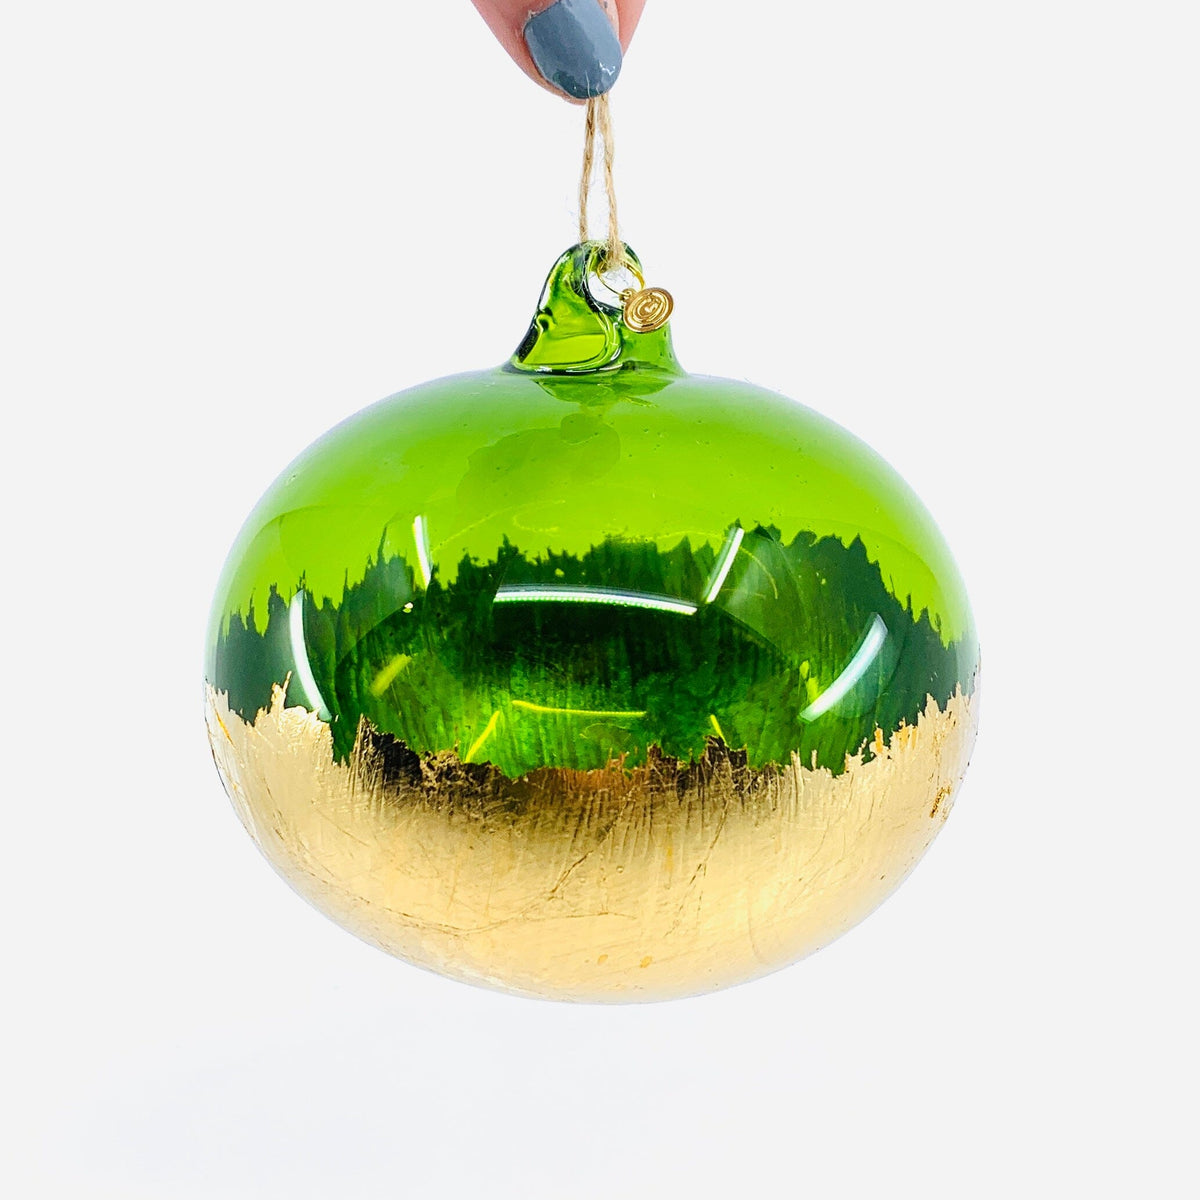 Rainbow Gold Dipped Orb Ornament One Hundred 80 Degrees J 